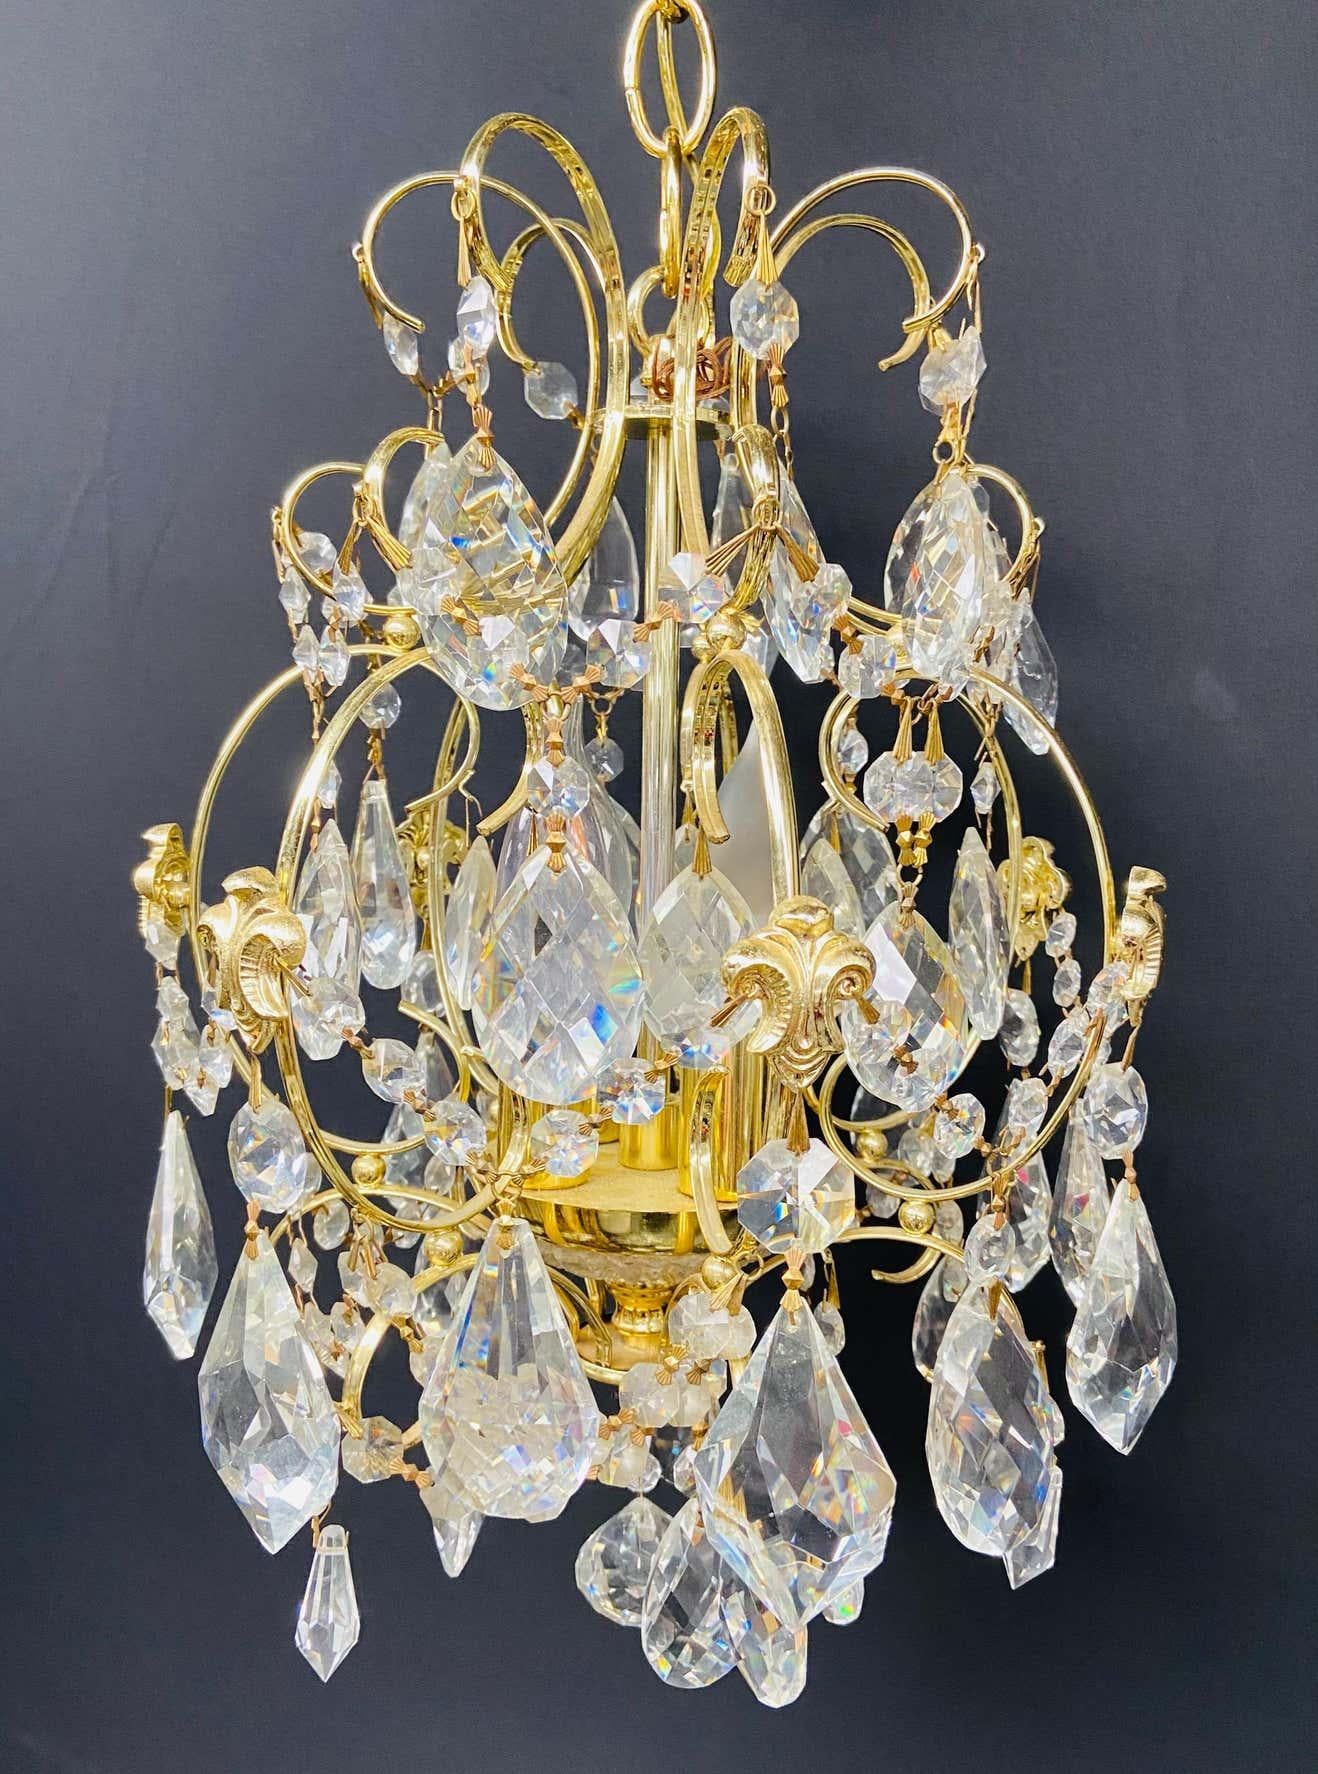 A beautiful cascading gilt brass frame and crystal chandelier in the Hollywood Regency style. The chandelier is in excellent condition and would look gorgeous in a foyer or a small living room.

Dimensions: 15